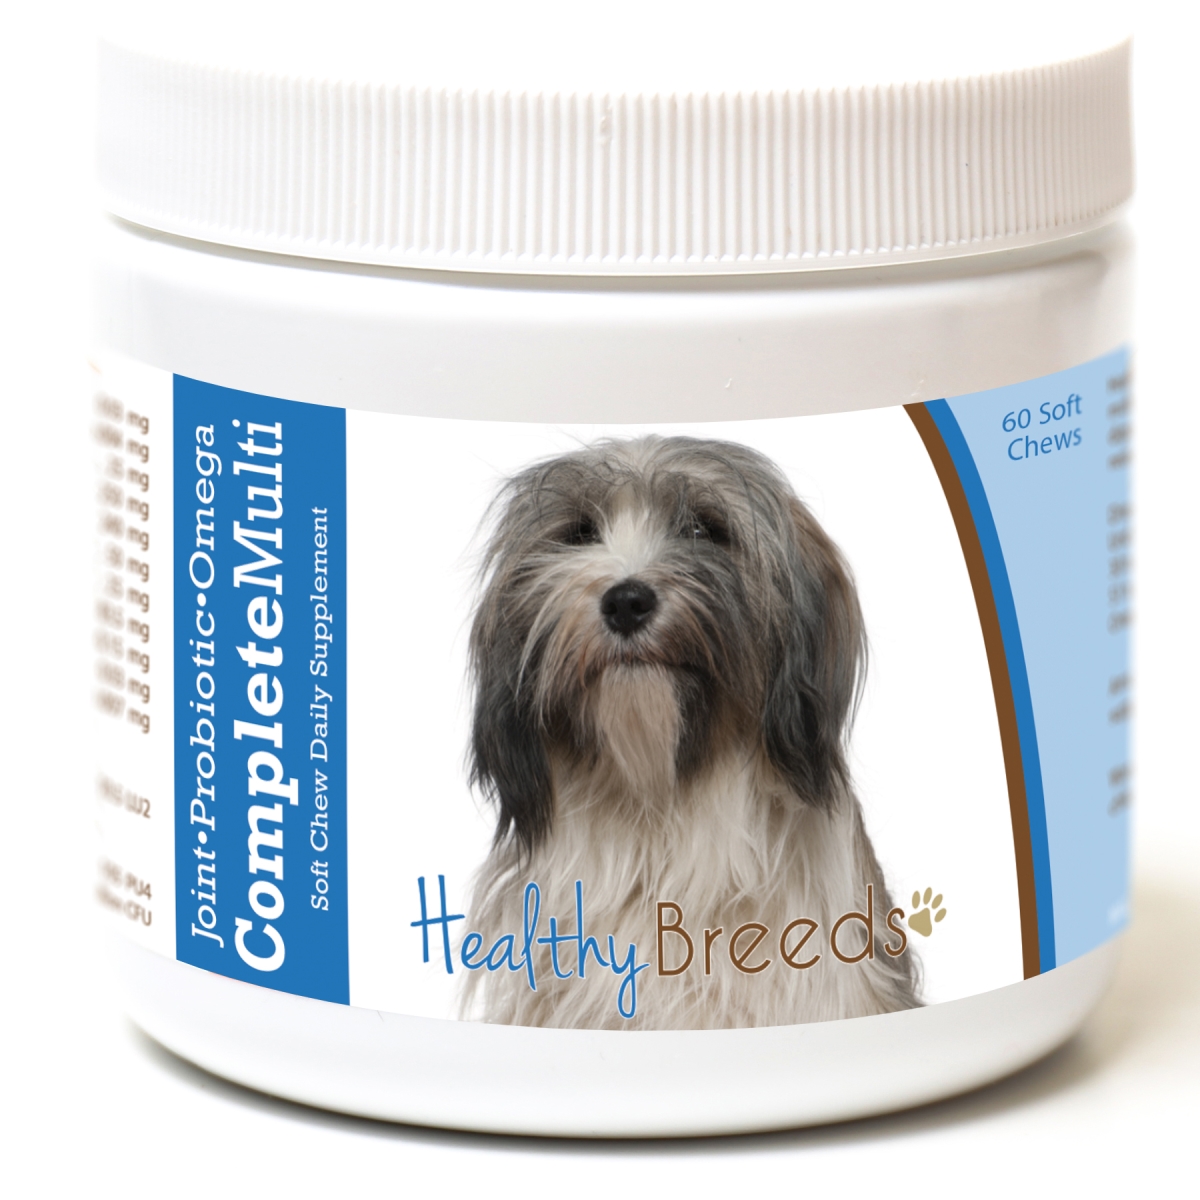 Picture of Healthy Breeds 192959009187 Tibetan Terrier all in one Multivitamin Soft Chew - 60 Count